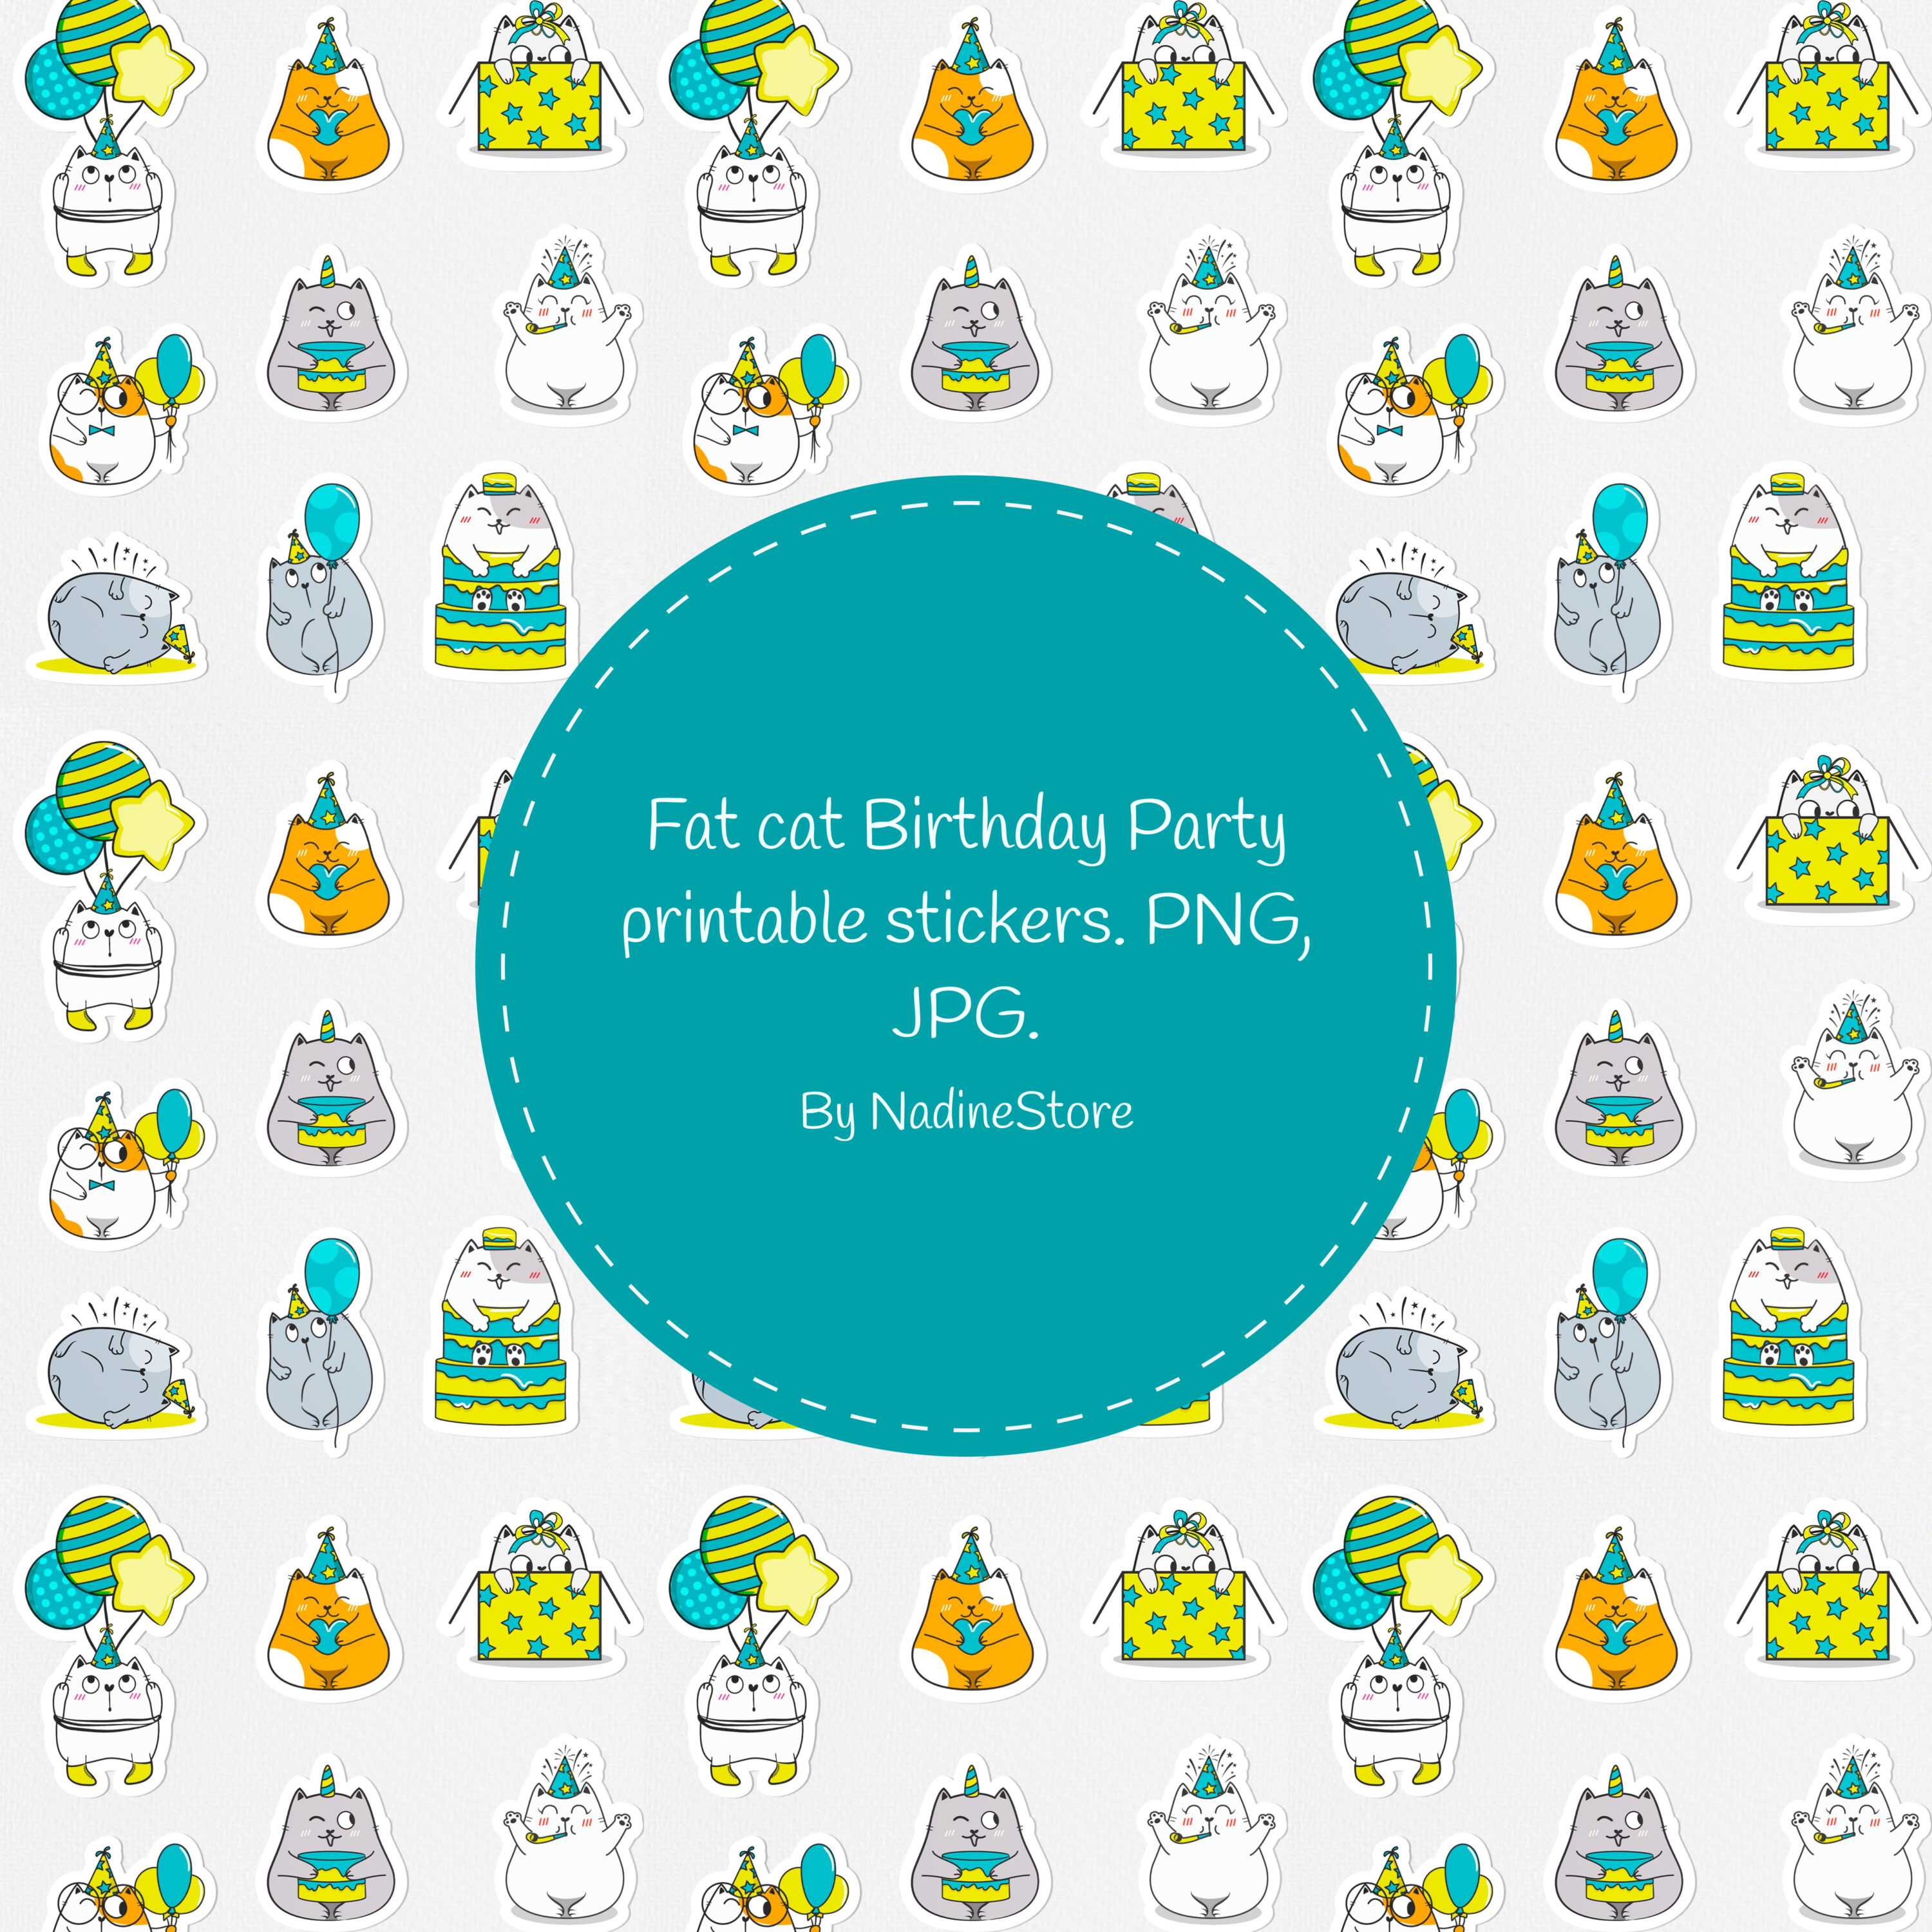 Fat cat birthday party printable stickers preview.